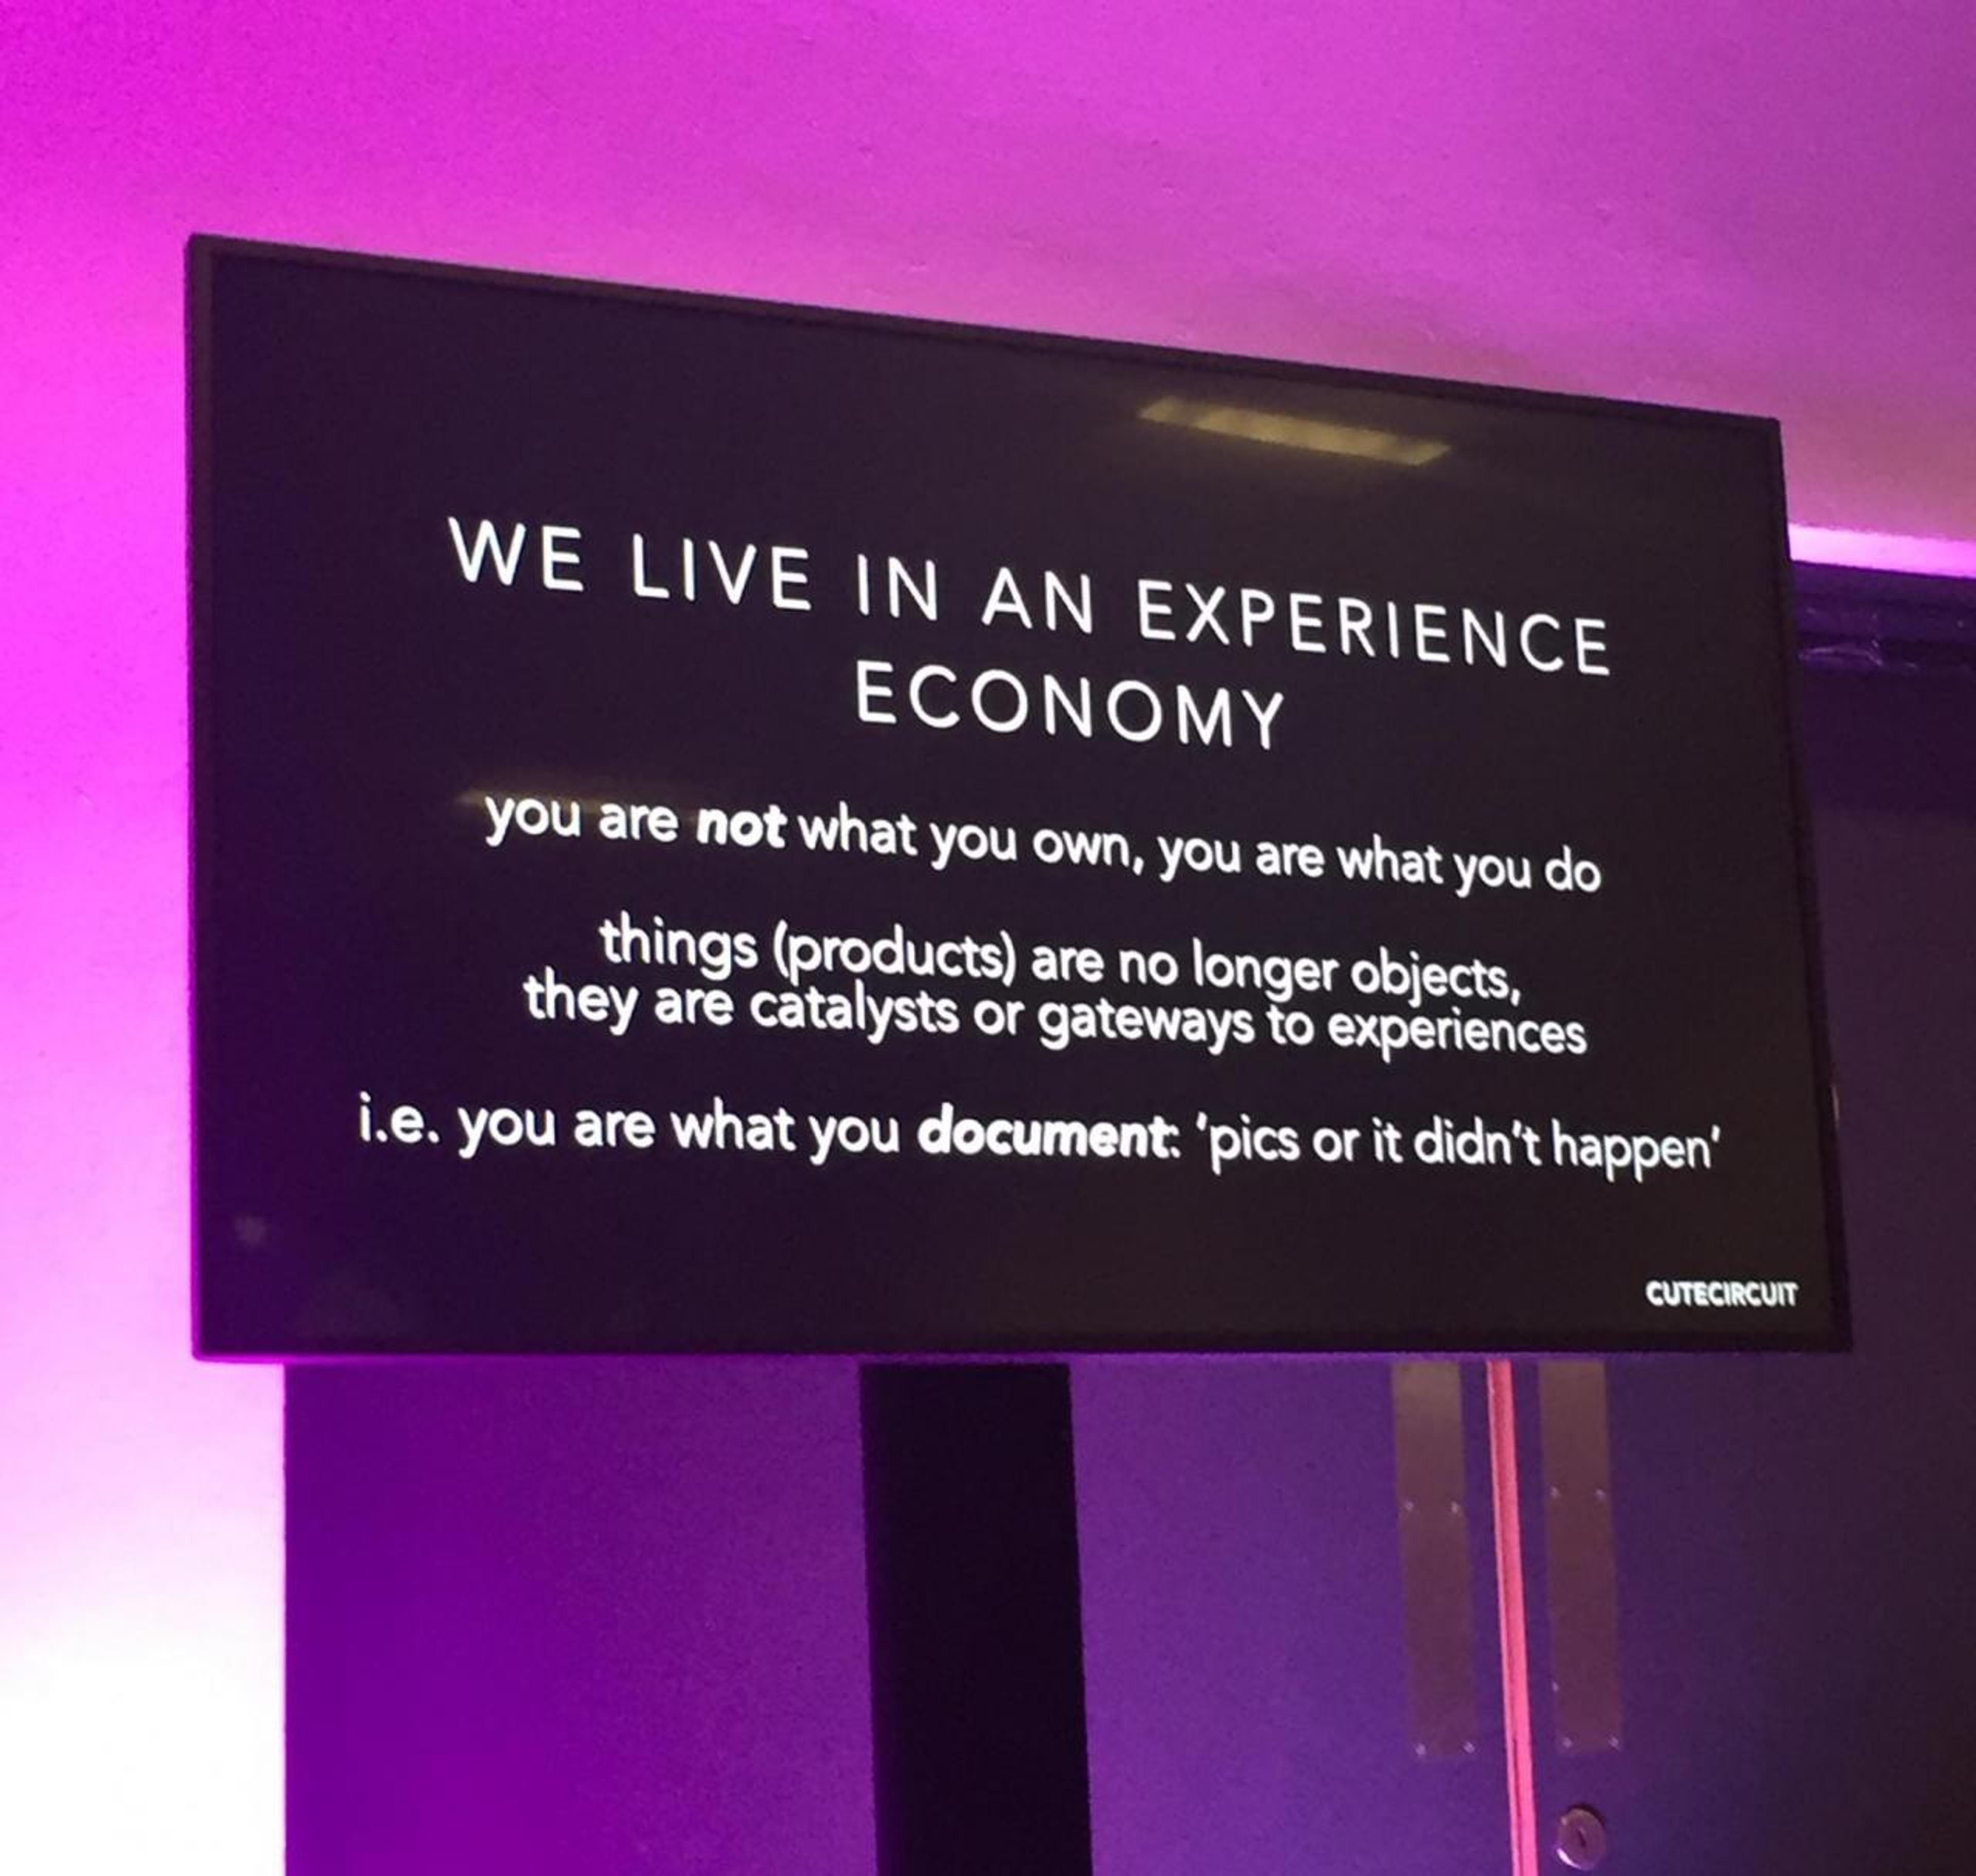 "WE LIVE IN AN EXPERIENCE ECONOMY"